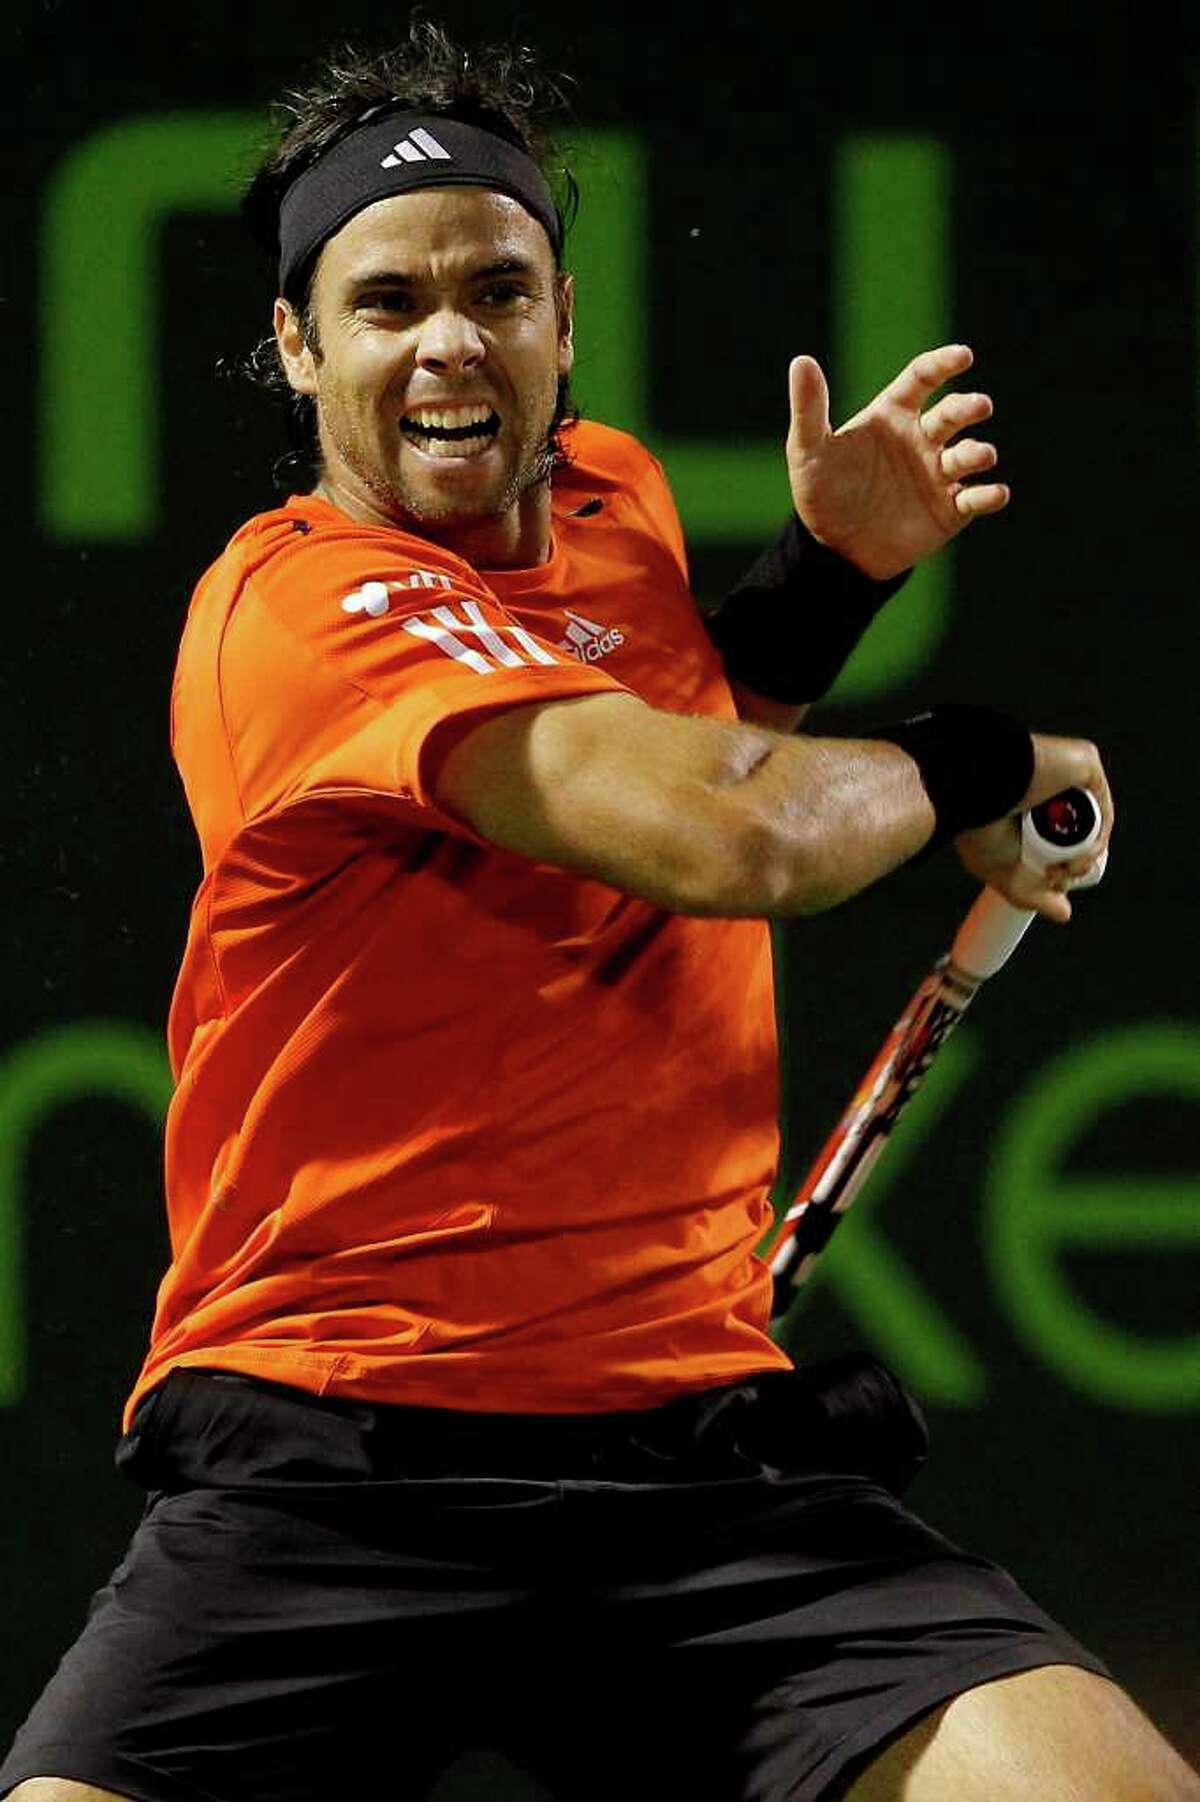 KEY BISCAYNE, FL - MARCH 29: Fernando Gonzalez of Chile returns a shot to Juan Monaco of Argentina during day seven of the 2010 Sony Ericsson Open at Crandon Park Tennis Center on March 29, 2010 in Key Biscayne, Florida. (Photo by Matthew Stockman/Getty Images) *** Local Caption *** Fernando Gonzalez